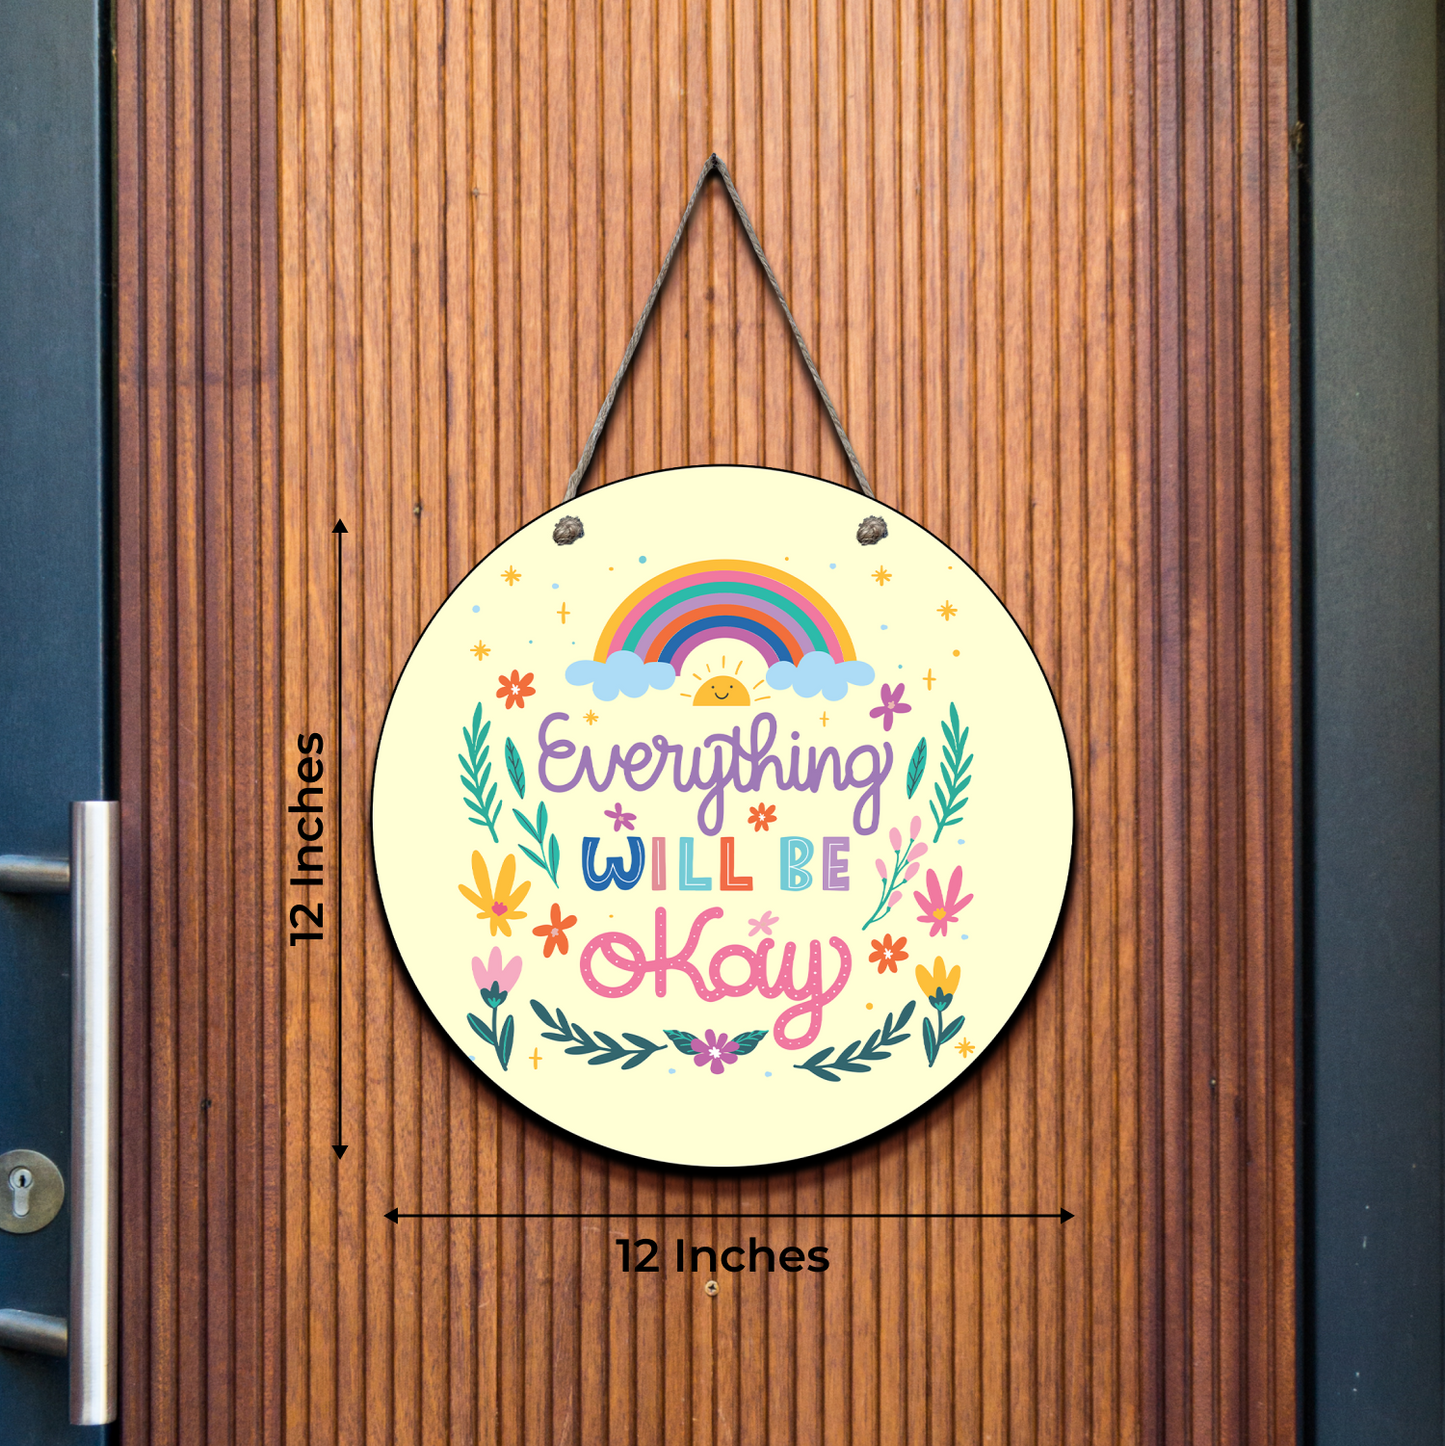 Everything Will Be Okay Wood Print Colorful Wall or Door Hanging